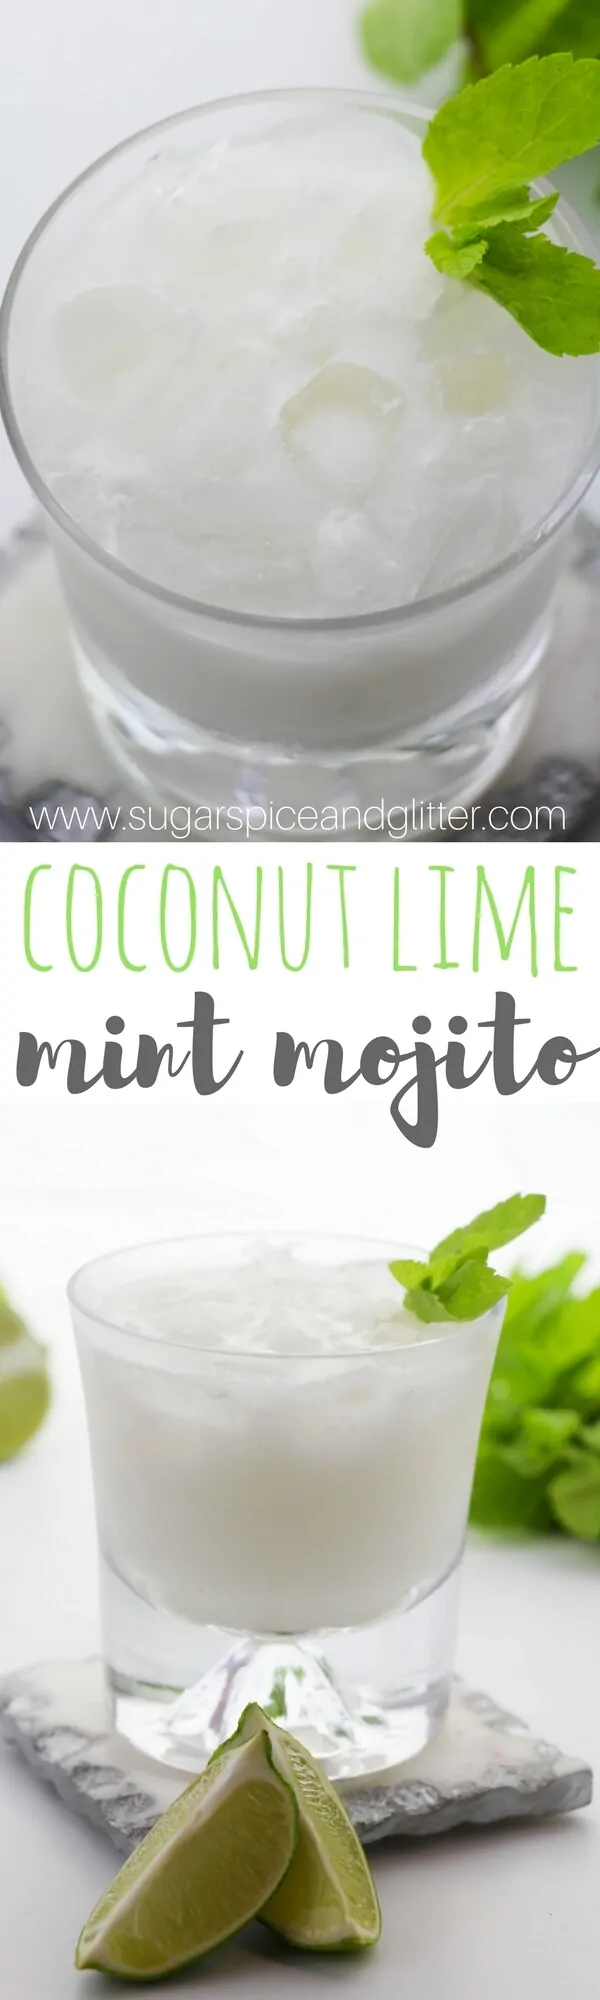 Coconut cocktail recipe - a fun mojito recipe made with coconut milk, lime juice, mint and rum. The perfect summer rum cocktail recipe